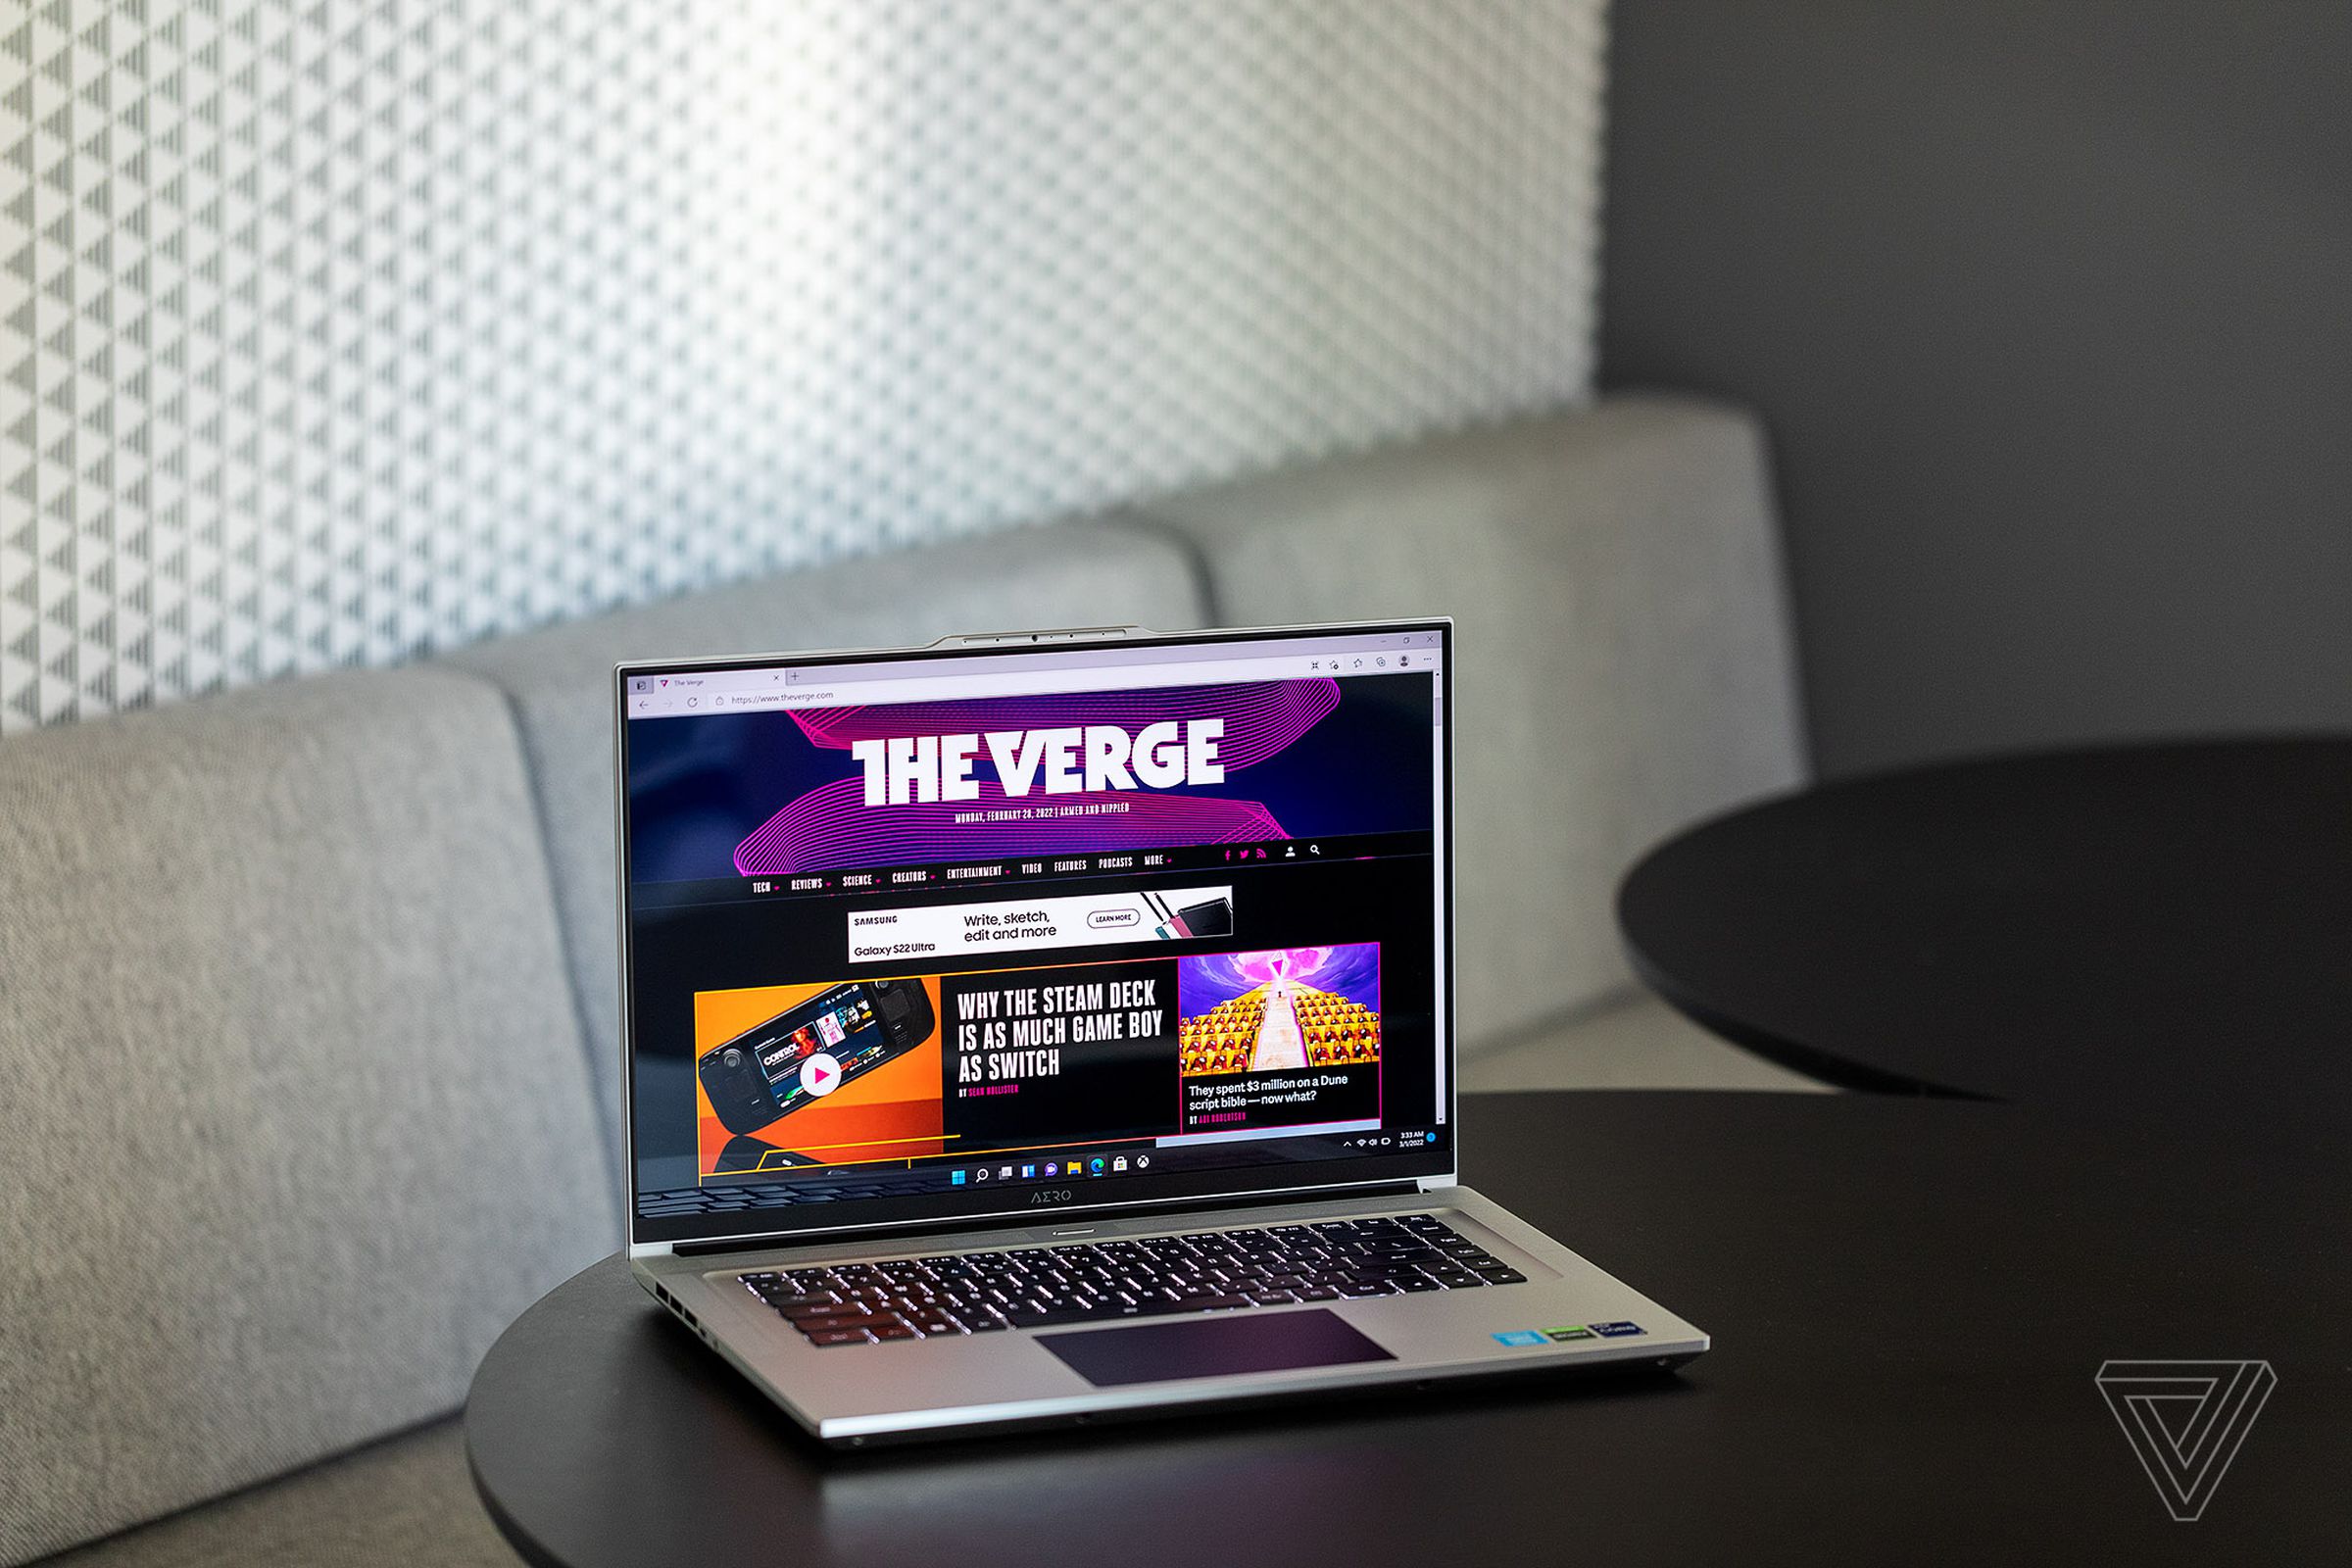 The Gigabyte Aero 16 angled to the right on a cafe table. The screen displays The Verge homepage.